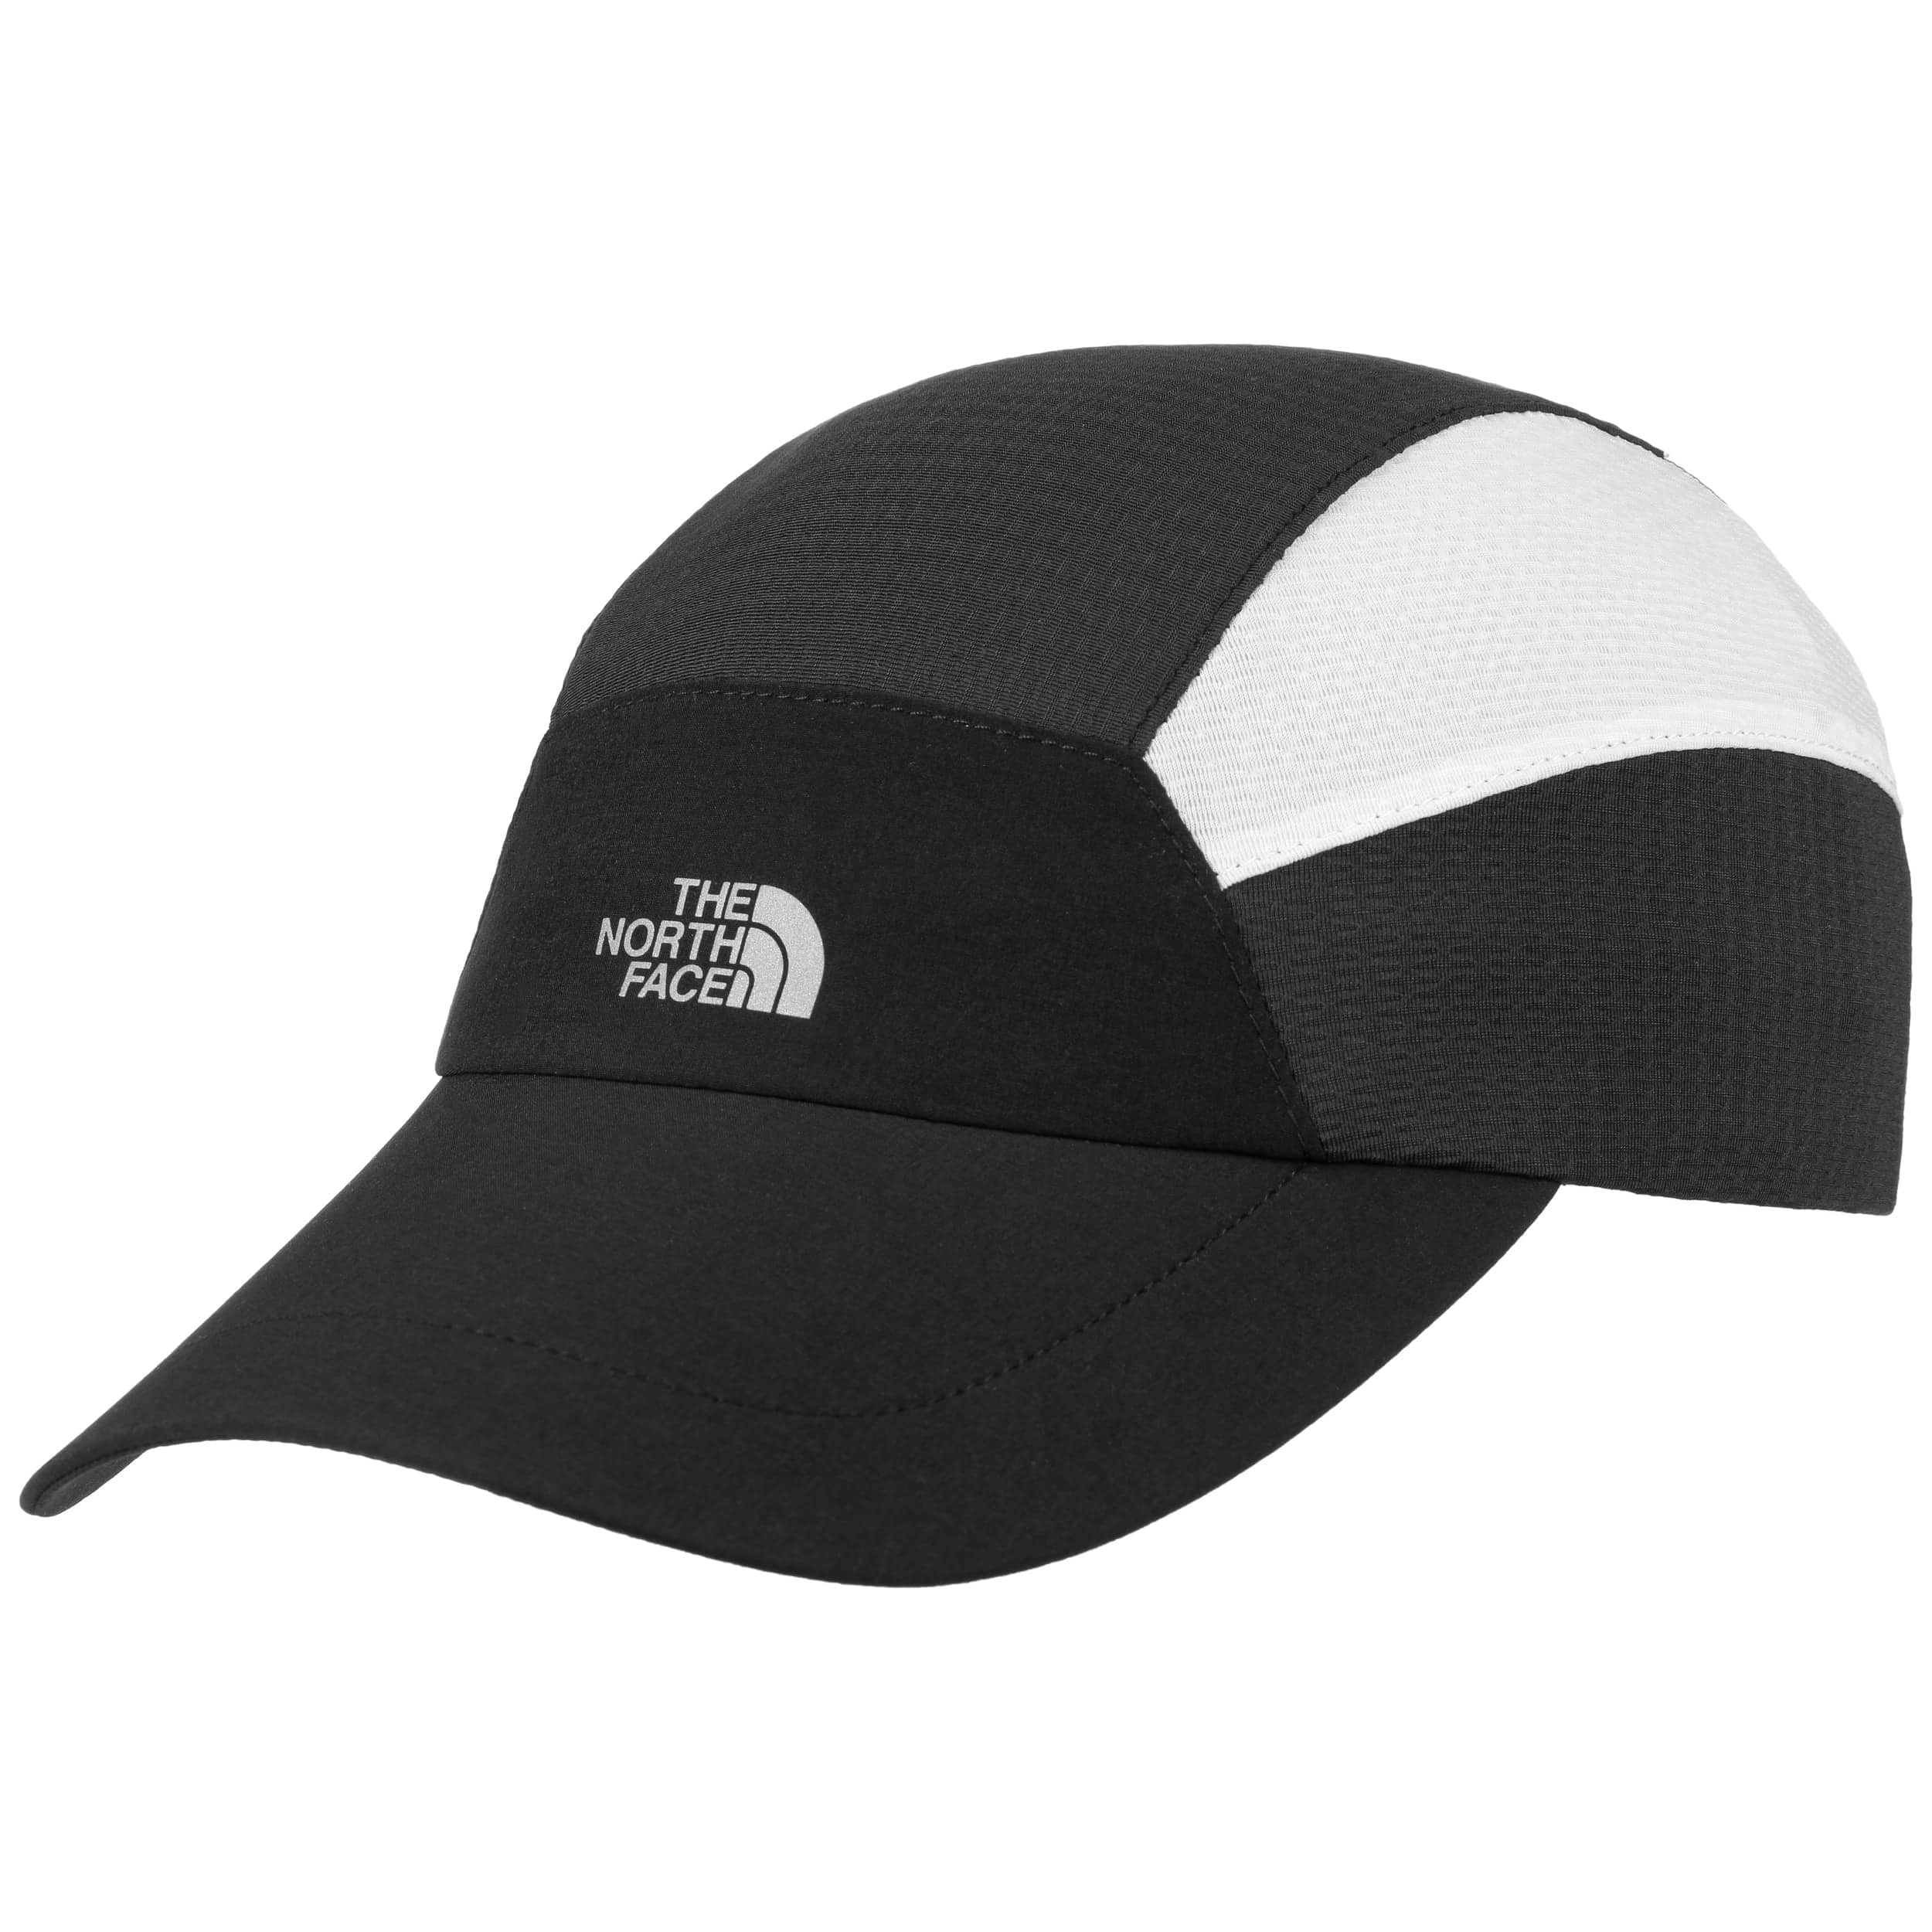 the north face snapback hat